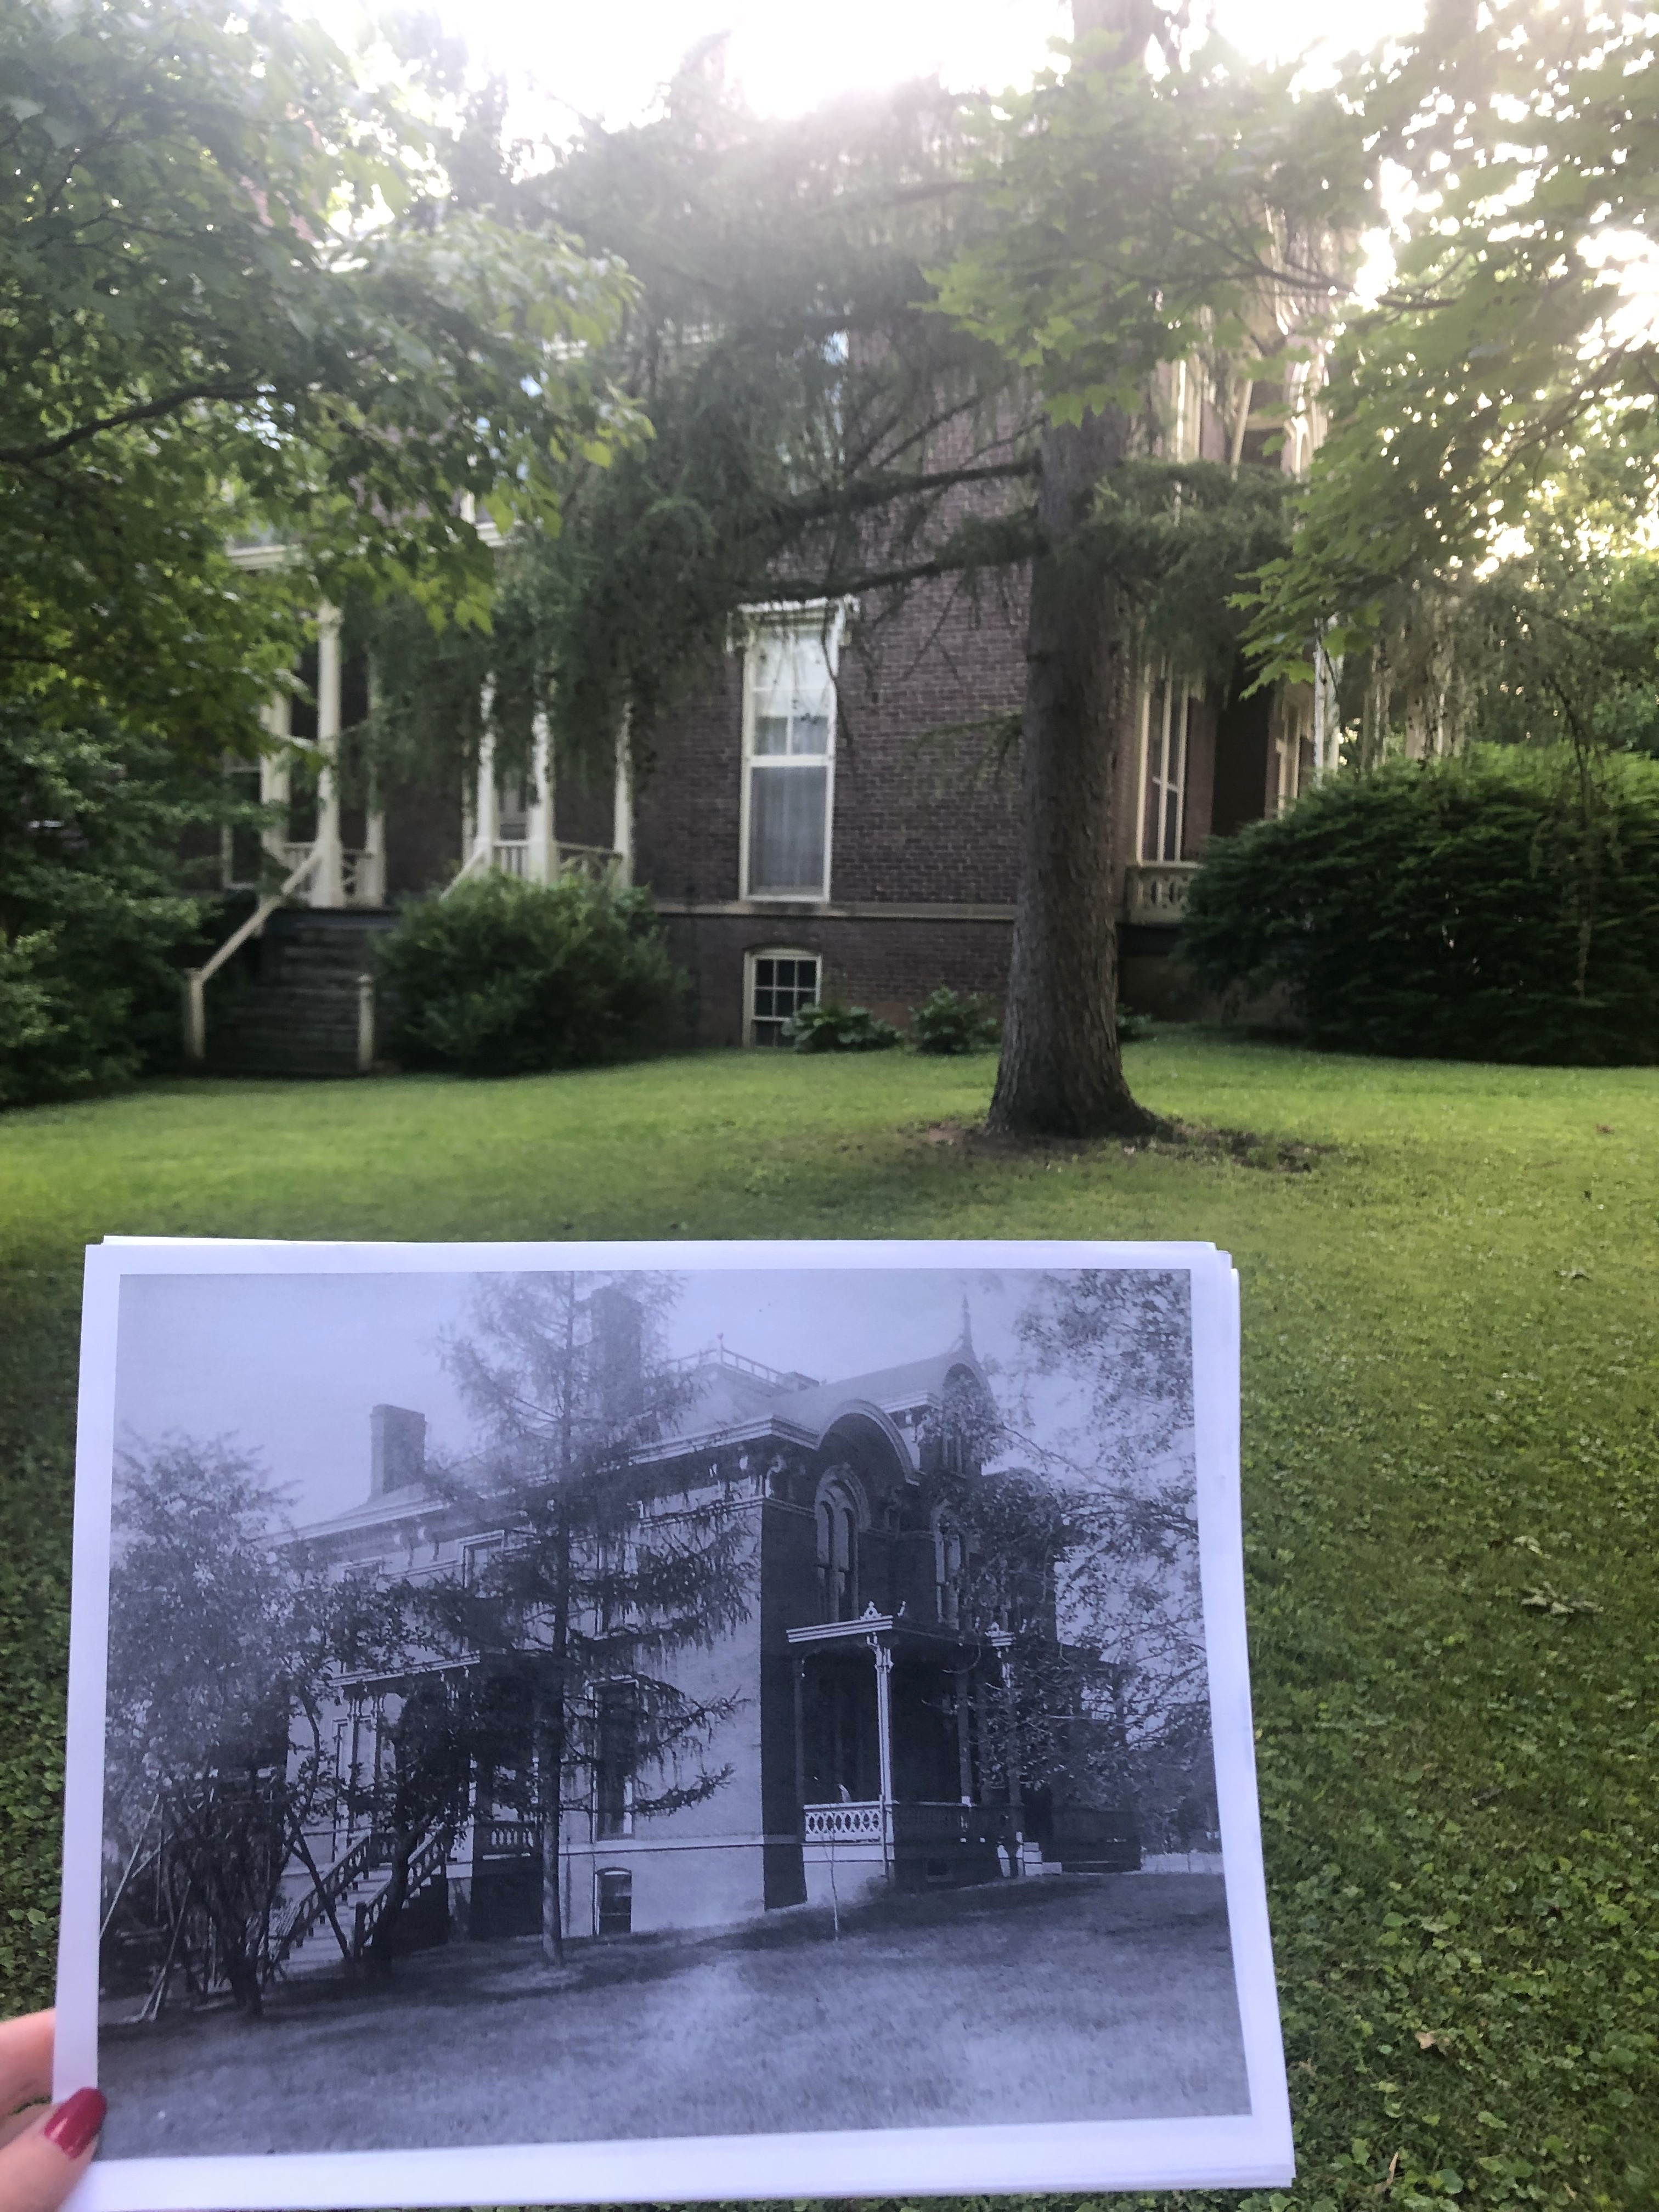 side porch at 151 Duncan from around 1905 to 2019